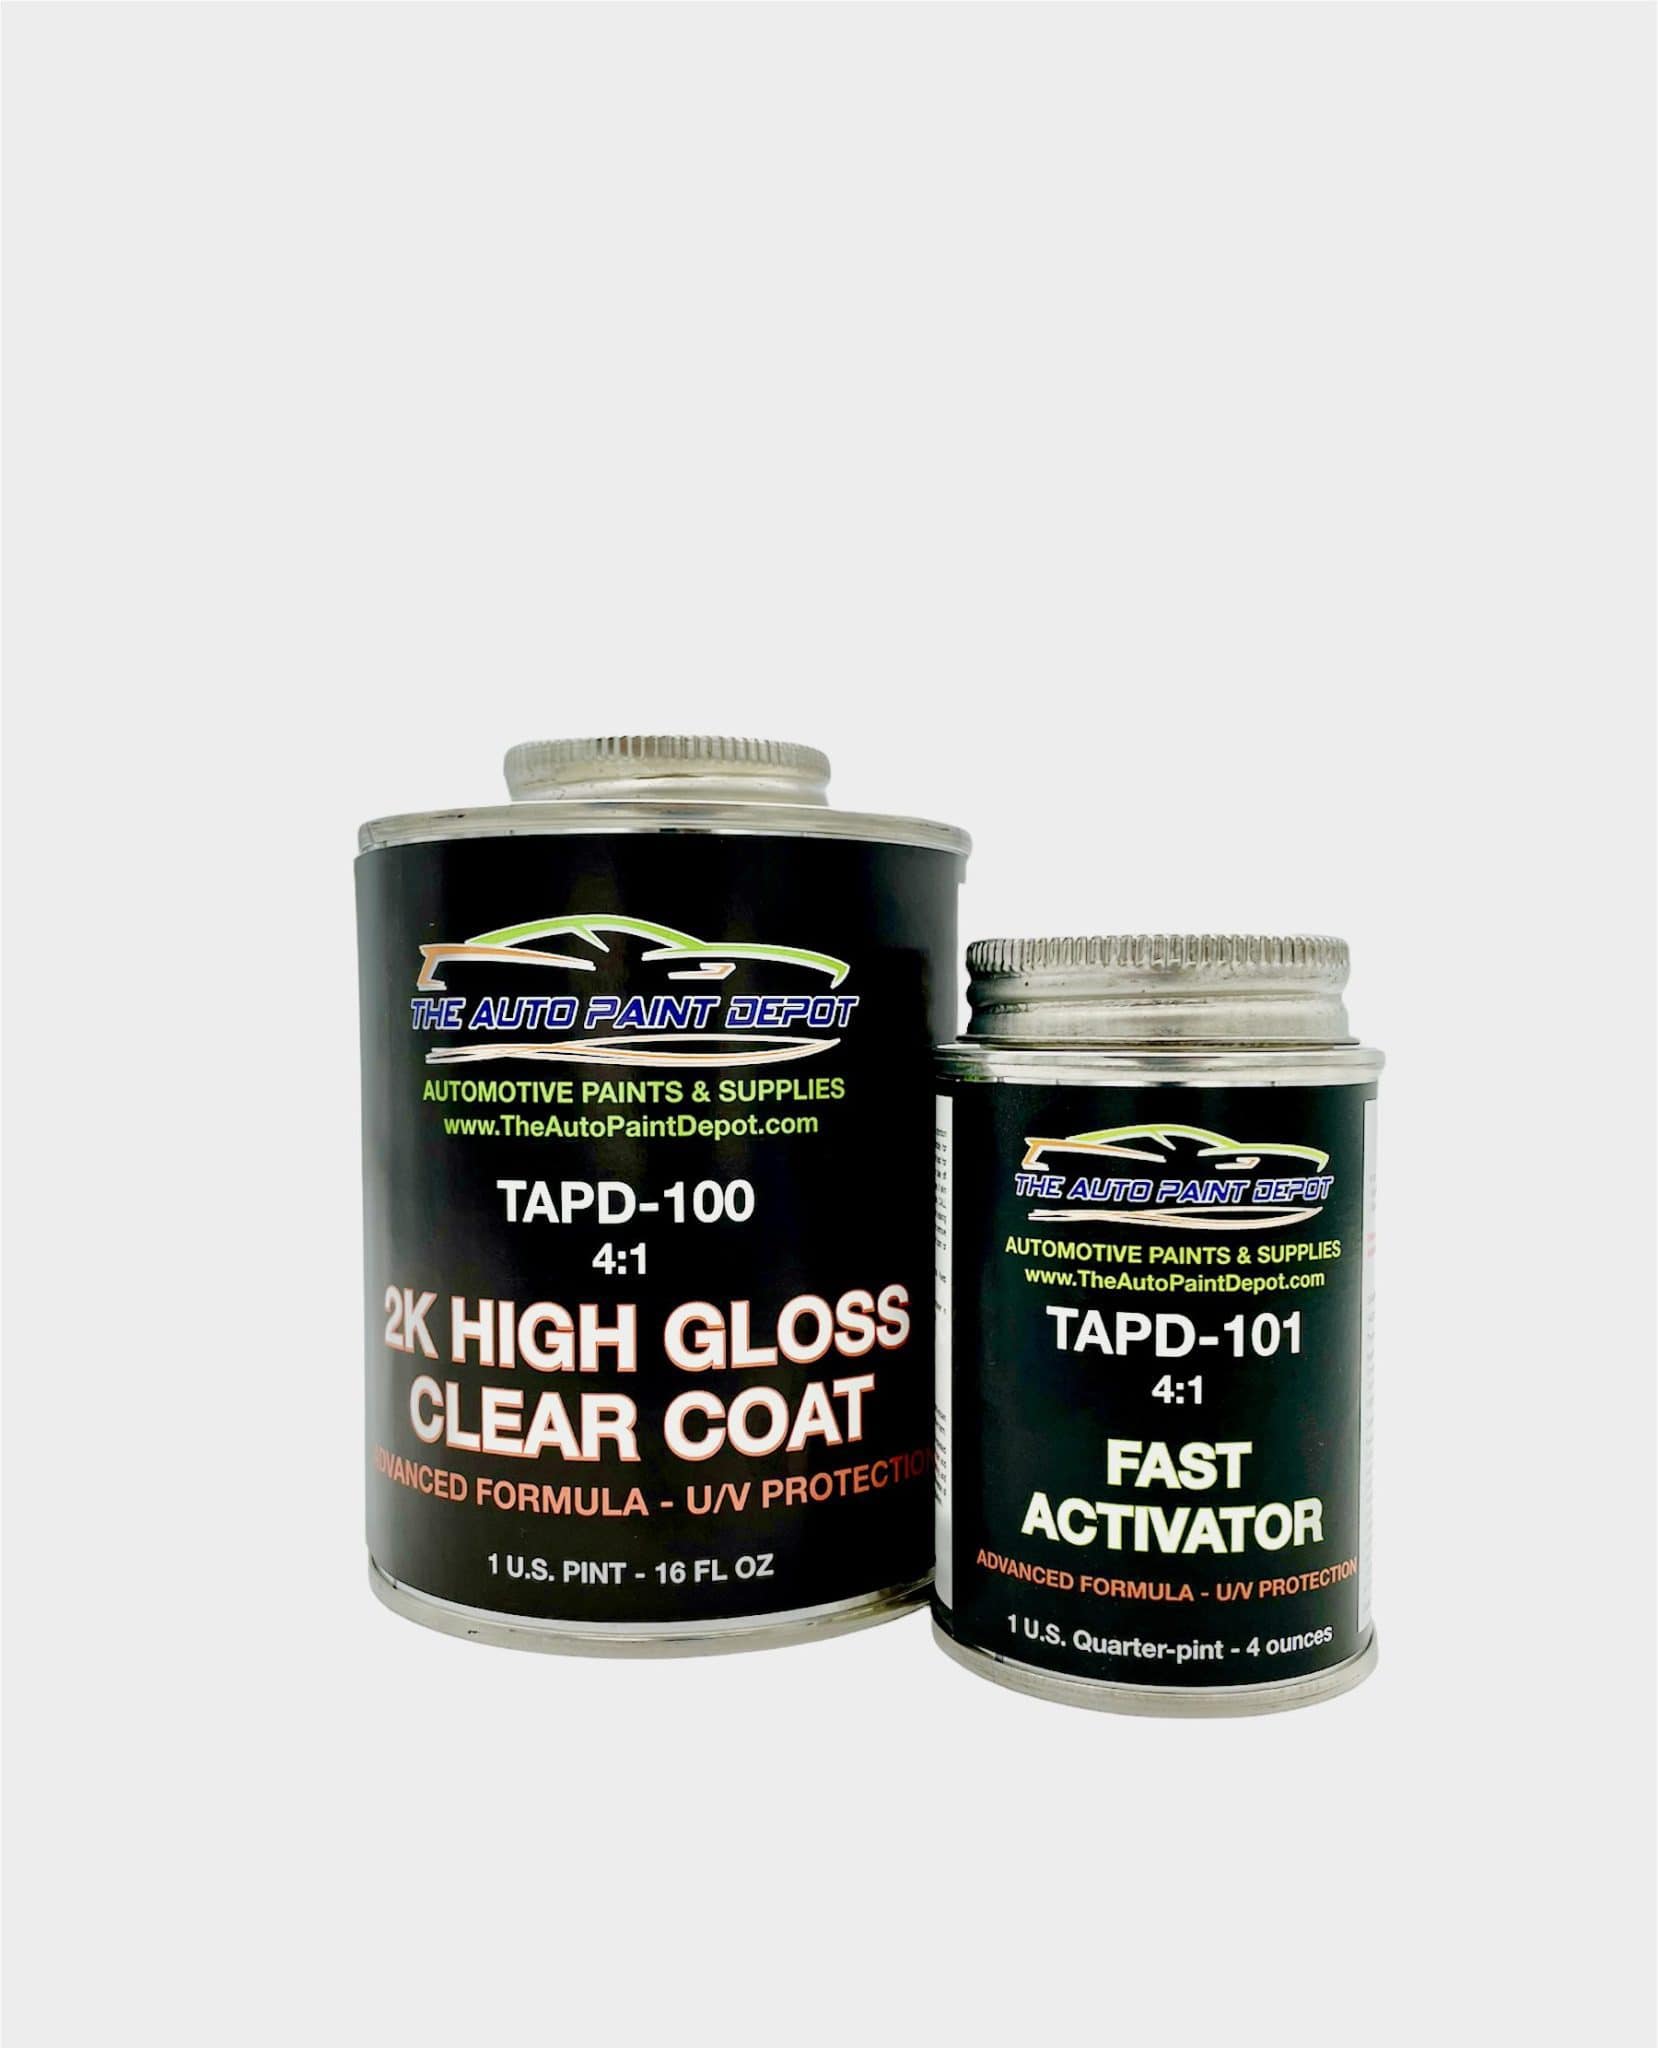 TAPD 2K HIGH GLOSS Professional Clear Coat Pint Kit w/FAST Activator (4:1) 2